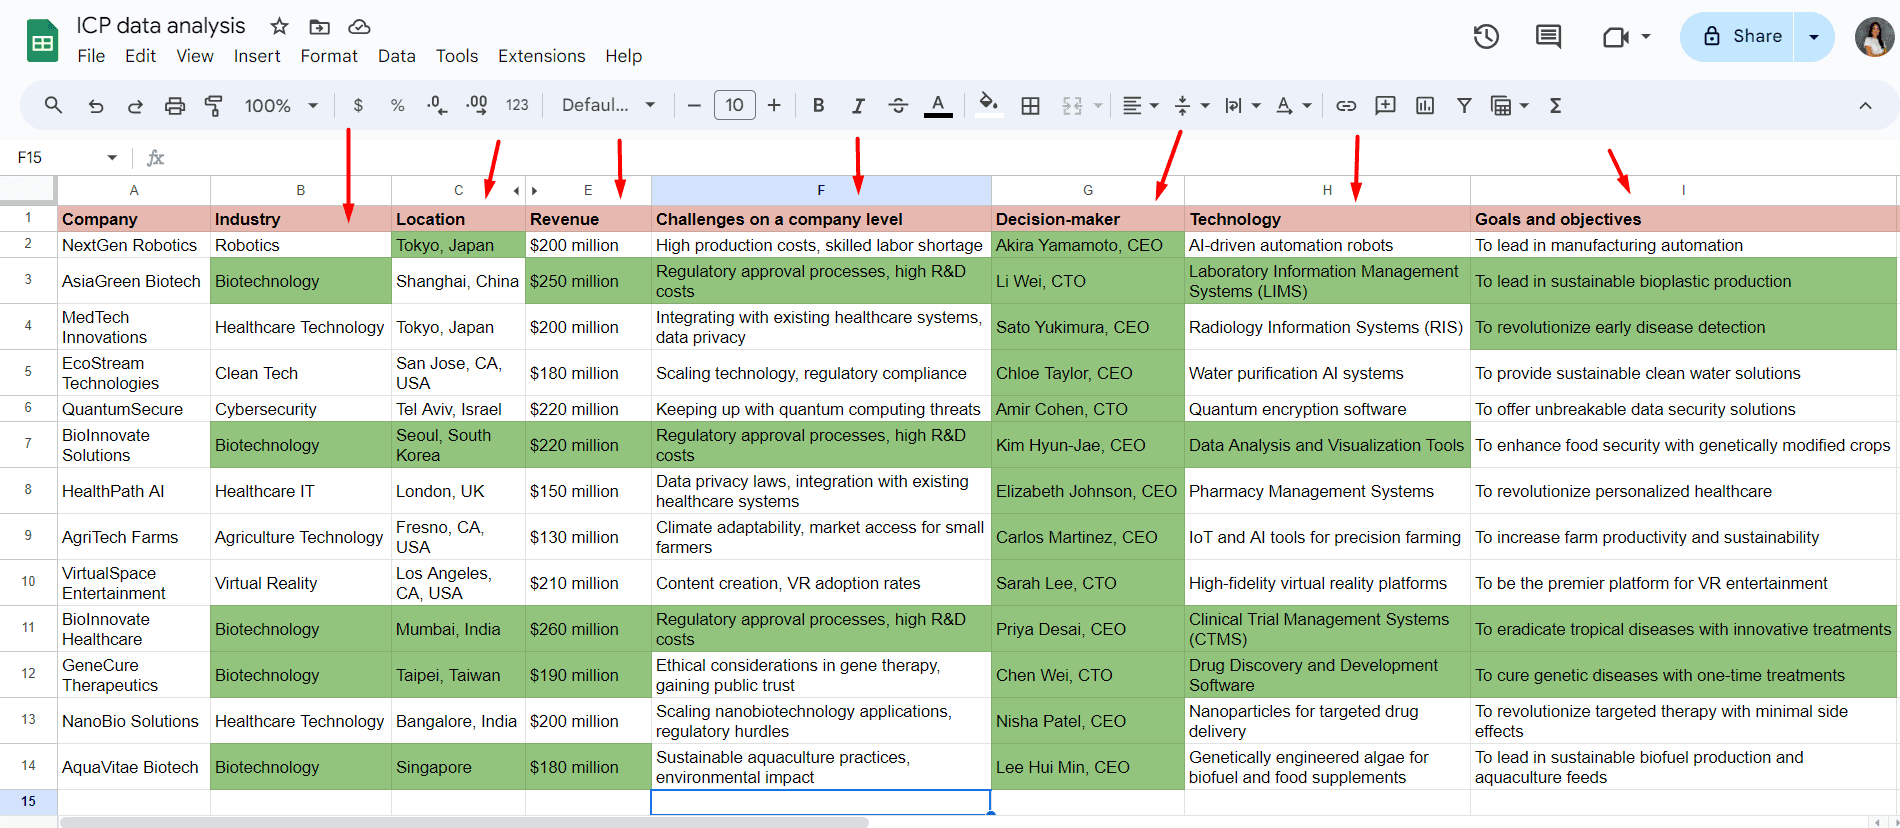 ICP Google Sheet table with noticeable patterns